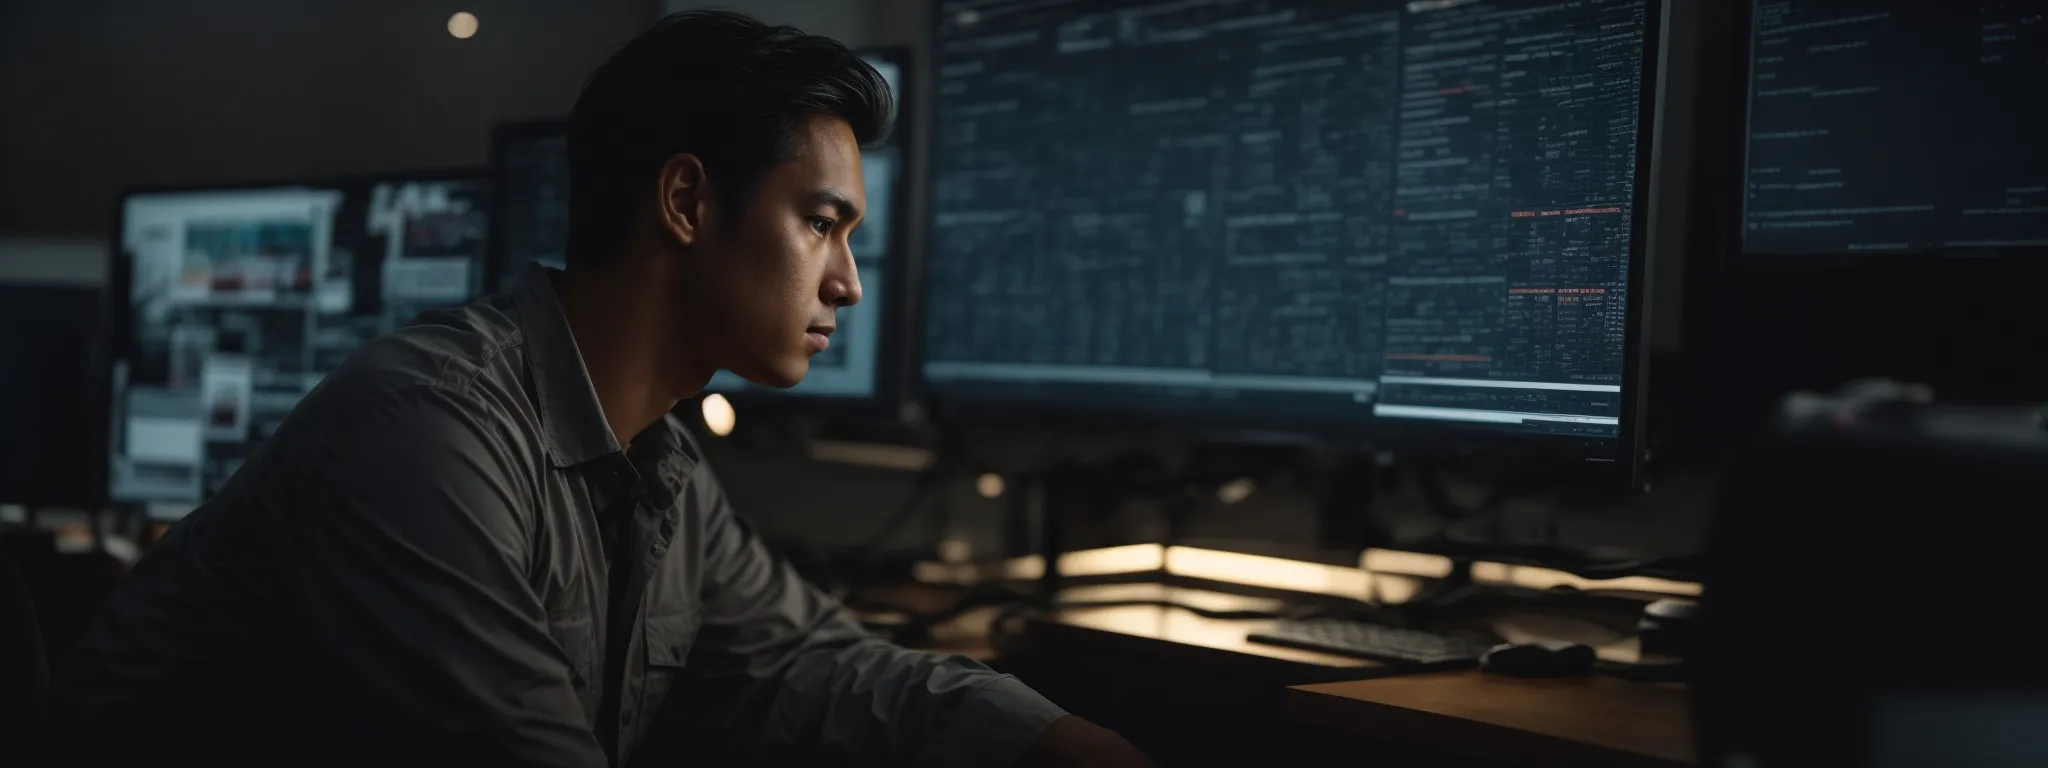 a focused individual gazes intently at a computer screen, adjusting webpage elements amidst a backdrop of digital marketing analytics.